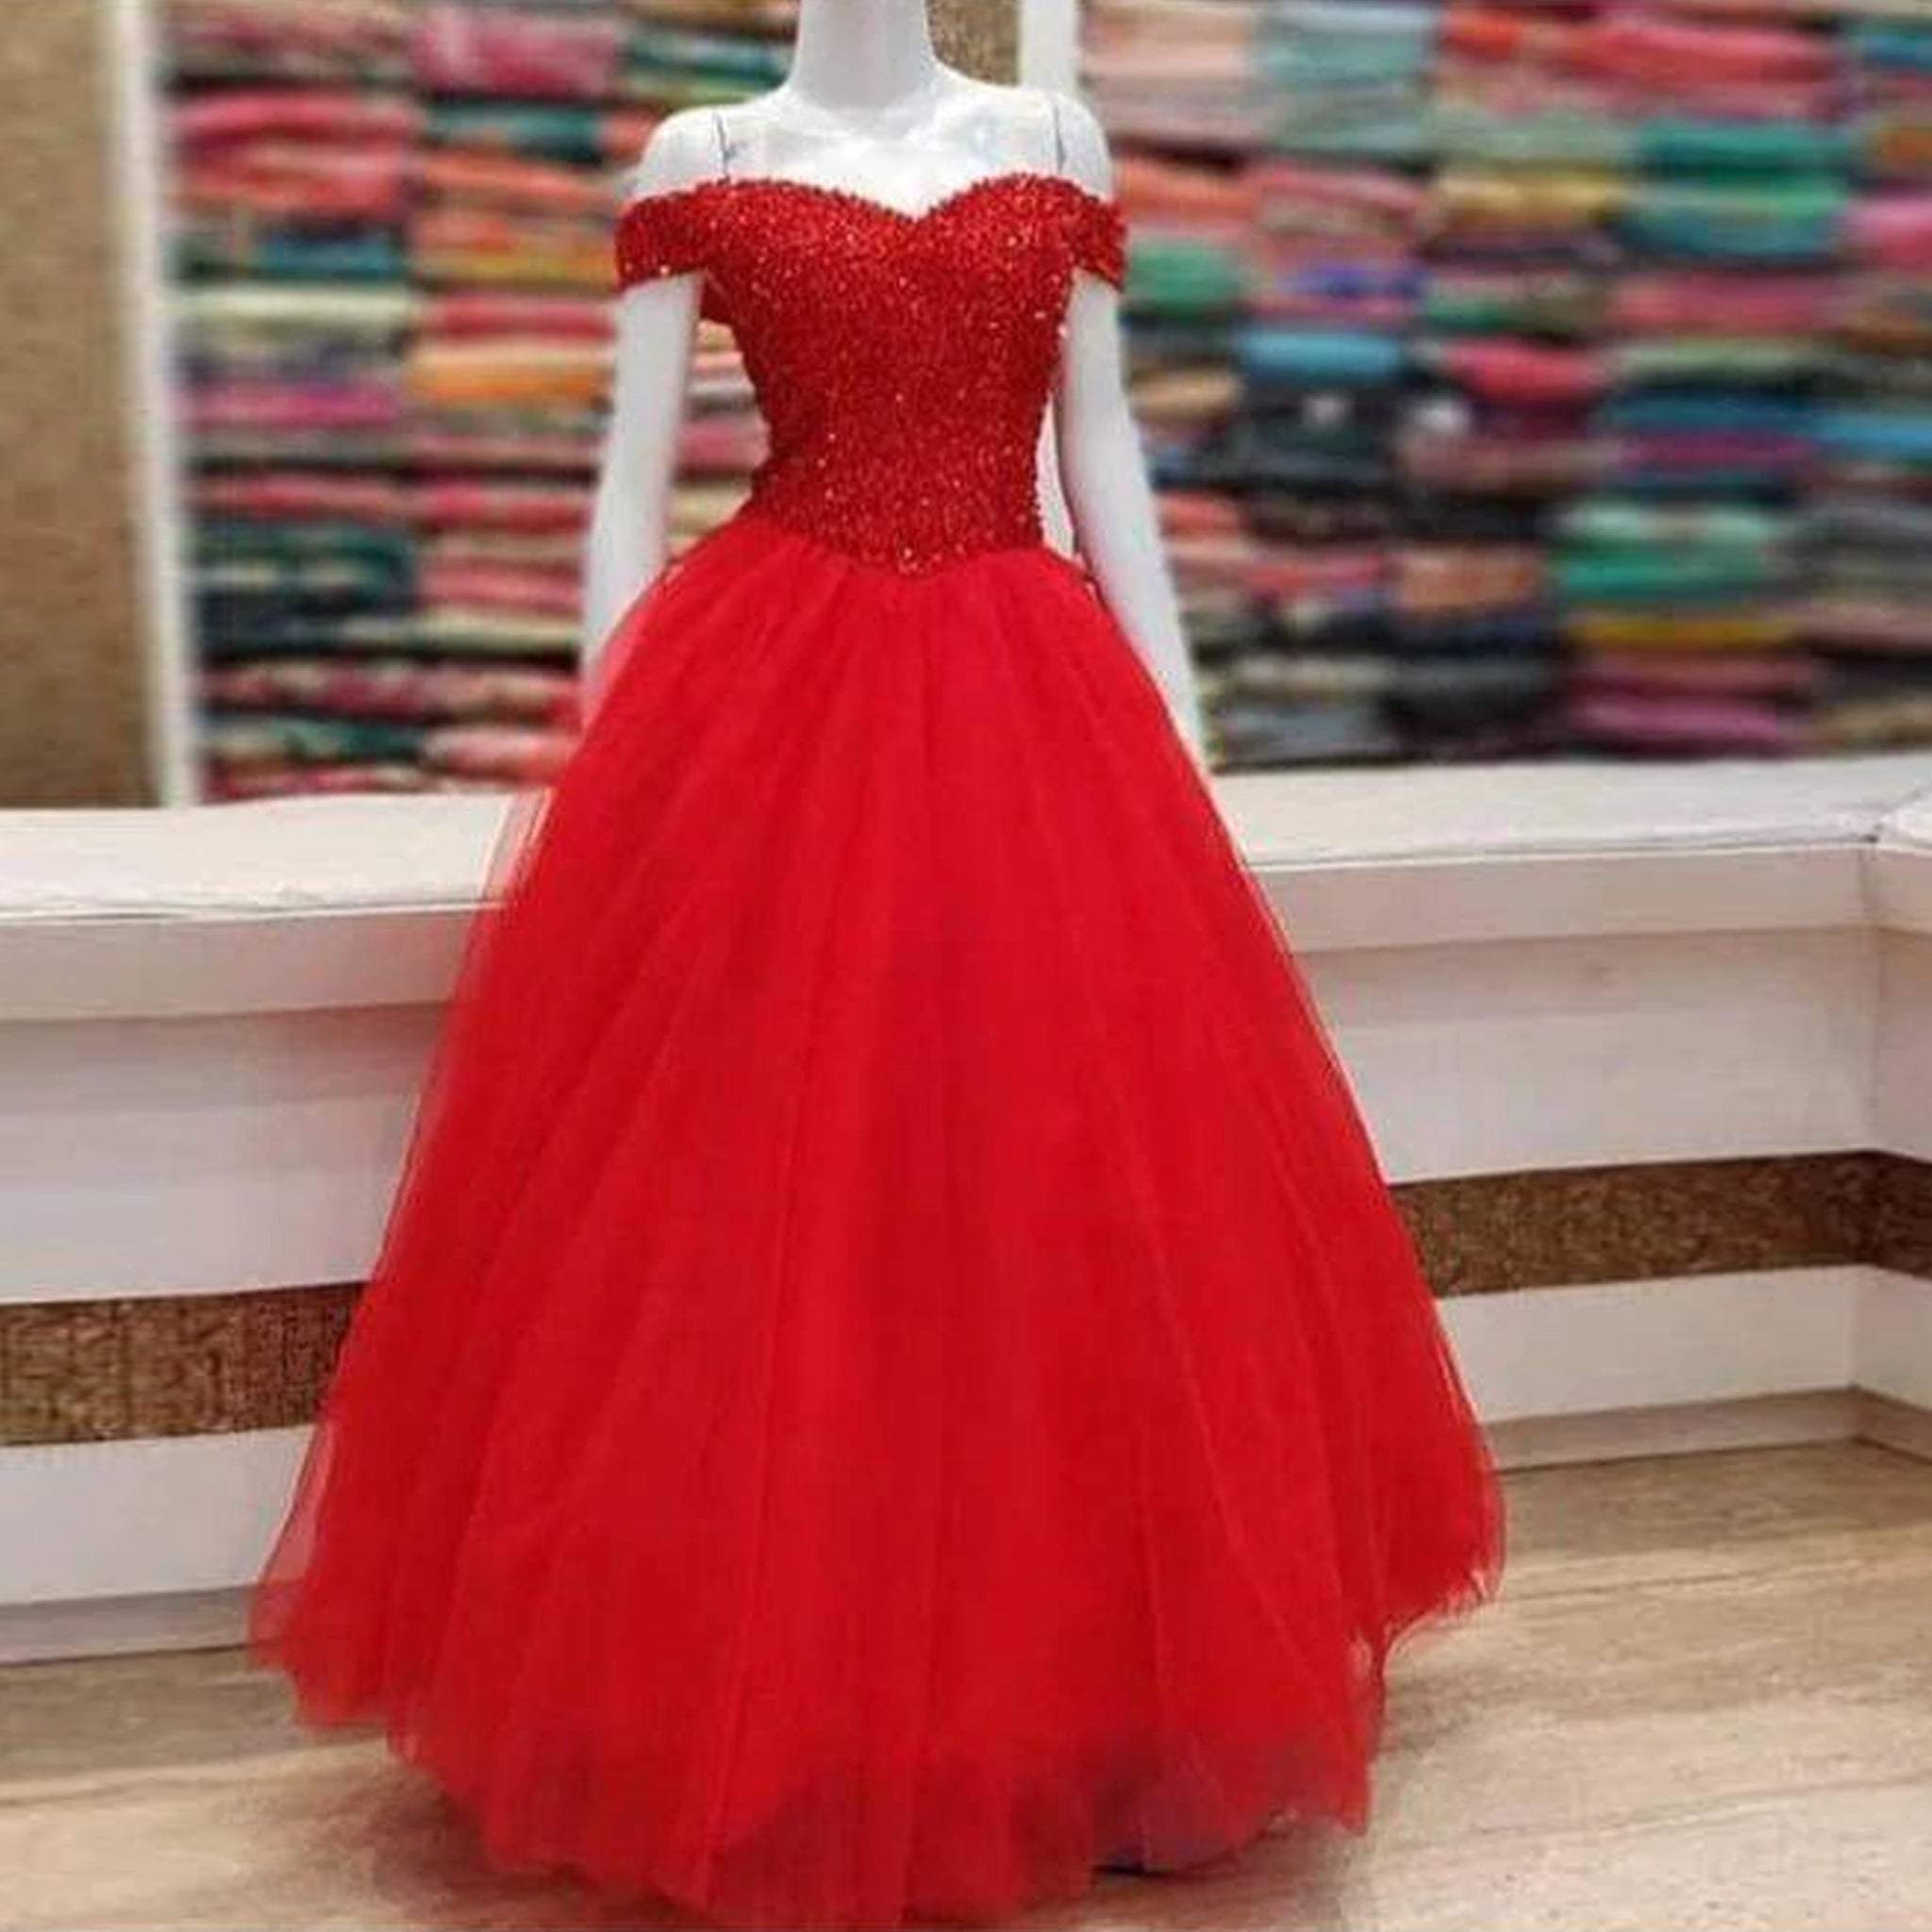 Share 88+ red gown dress design best